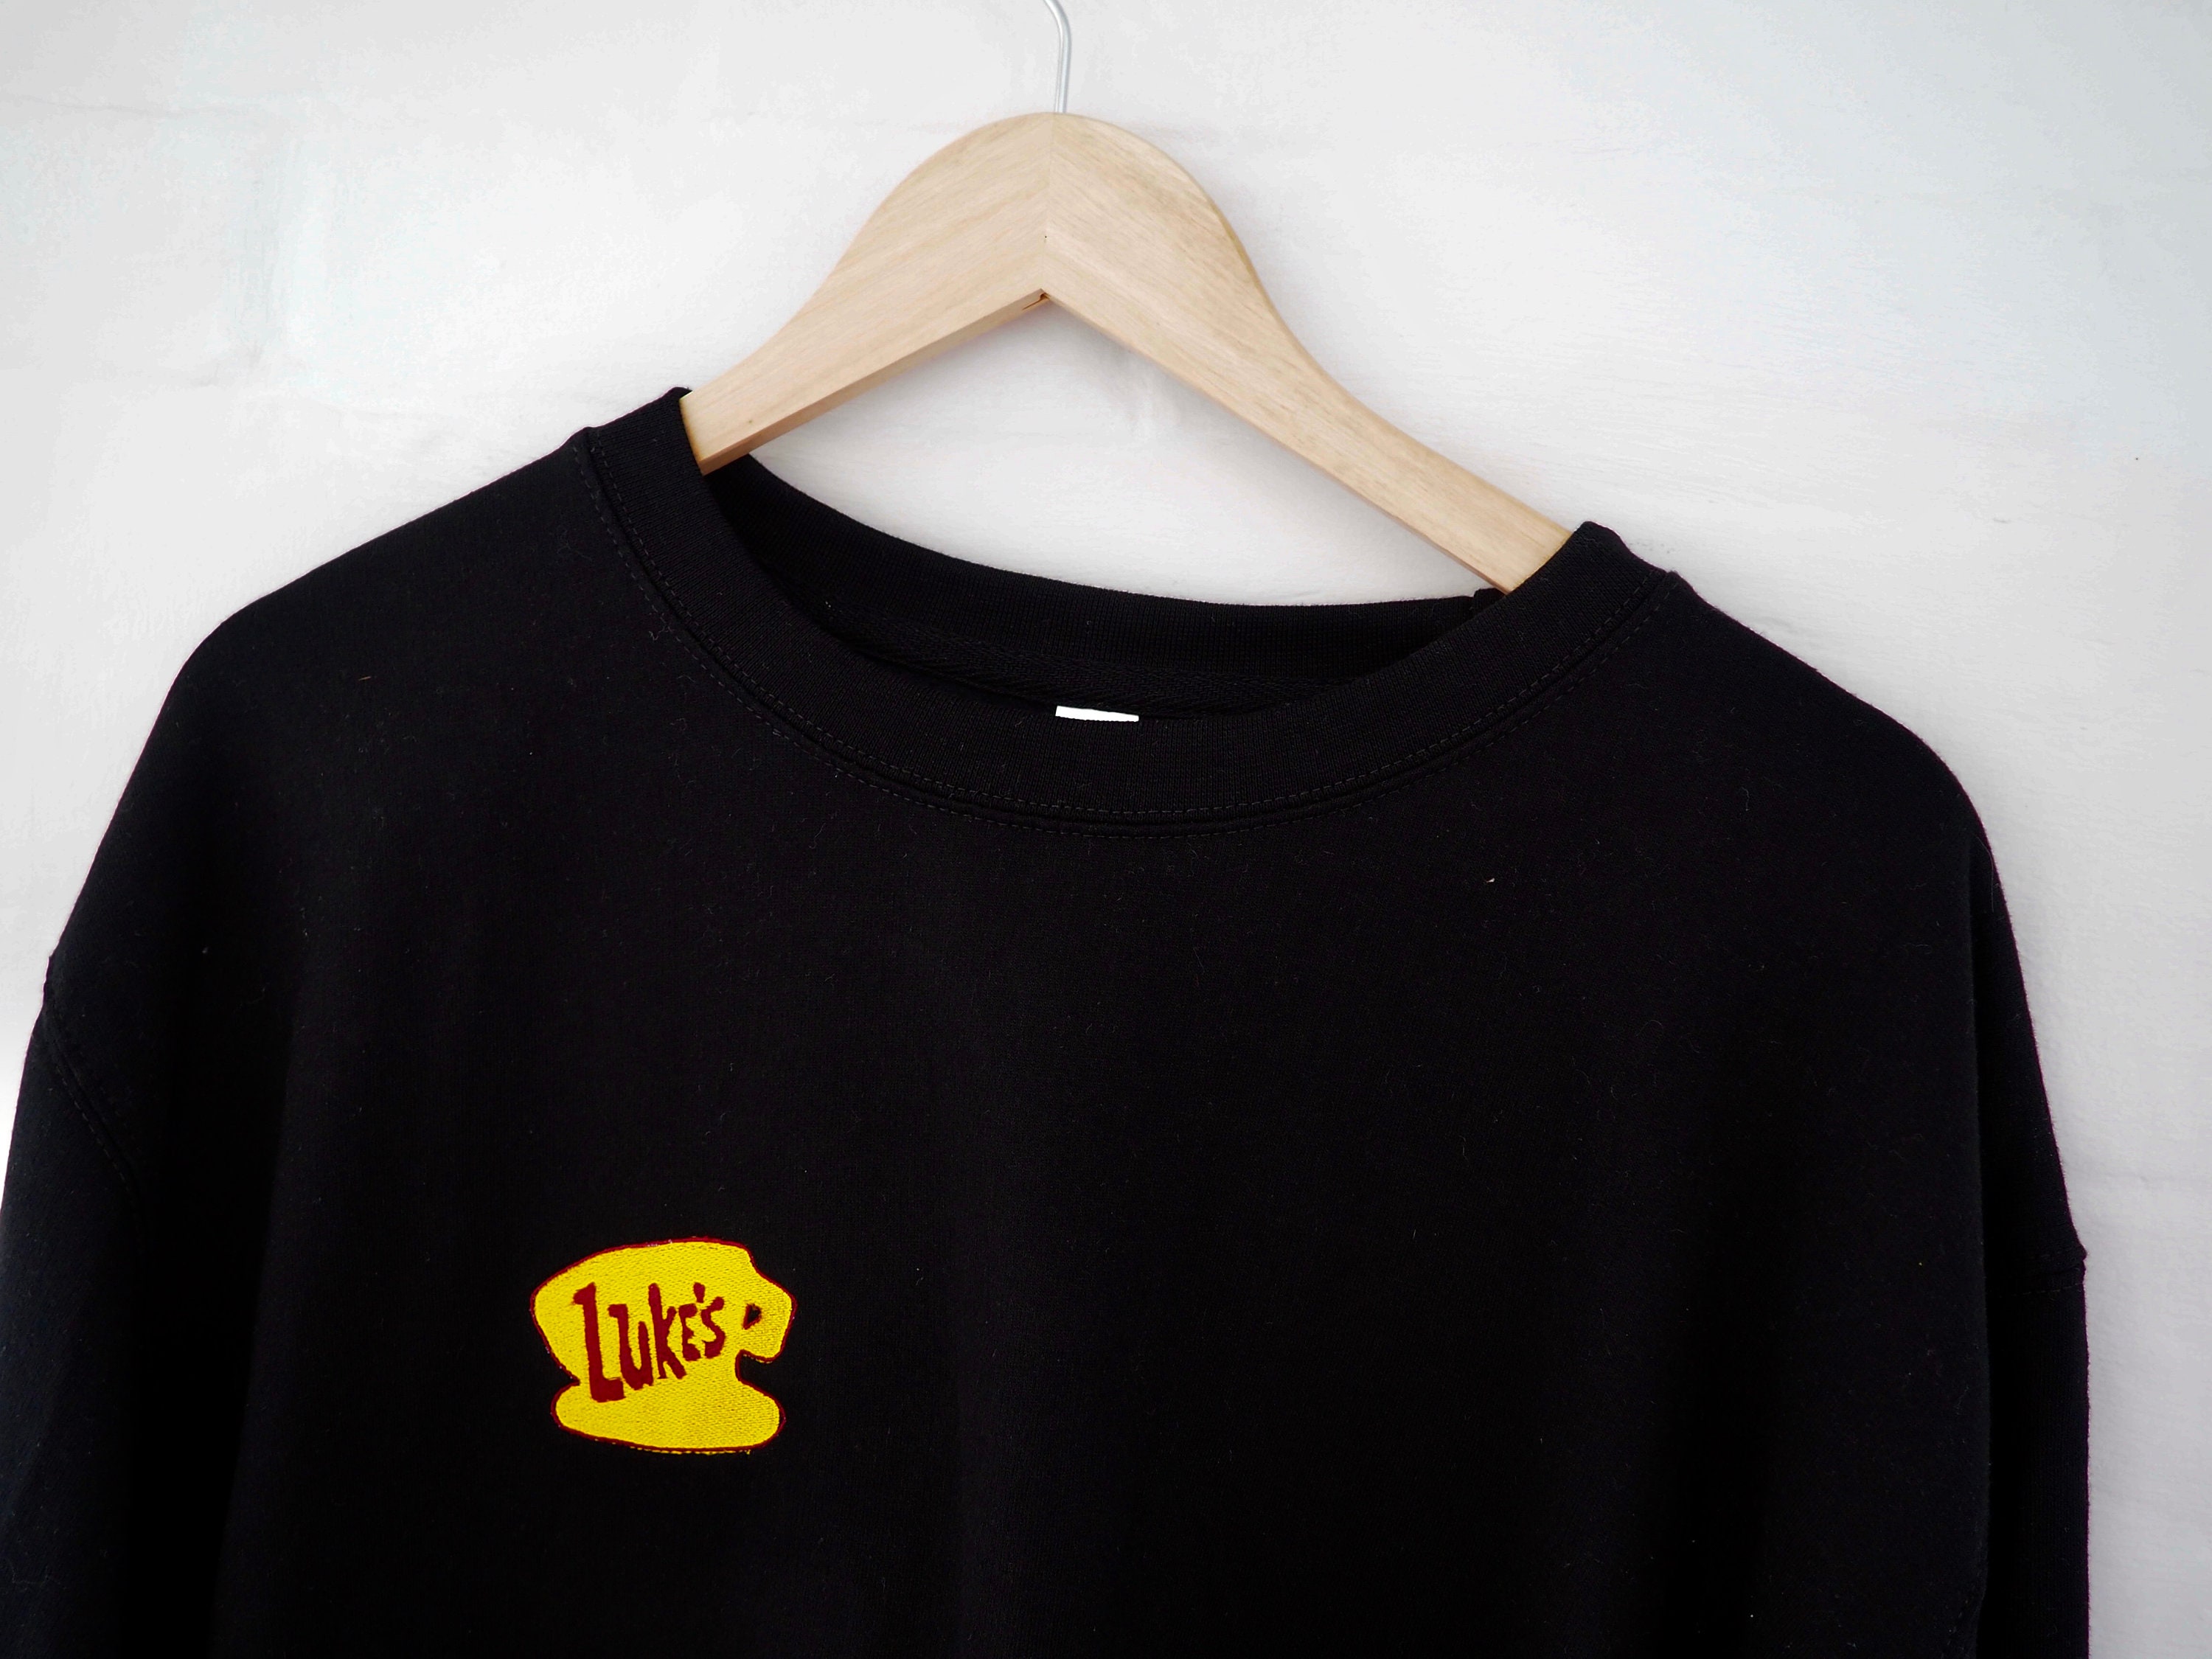 Luke's Diner Inspired Embroidered Coffee Cup Sweatshirt - Etsy